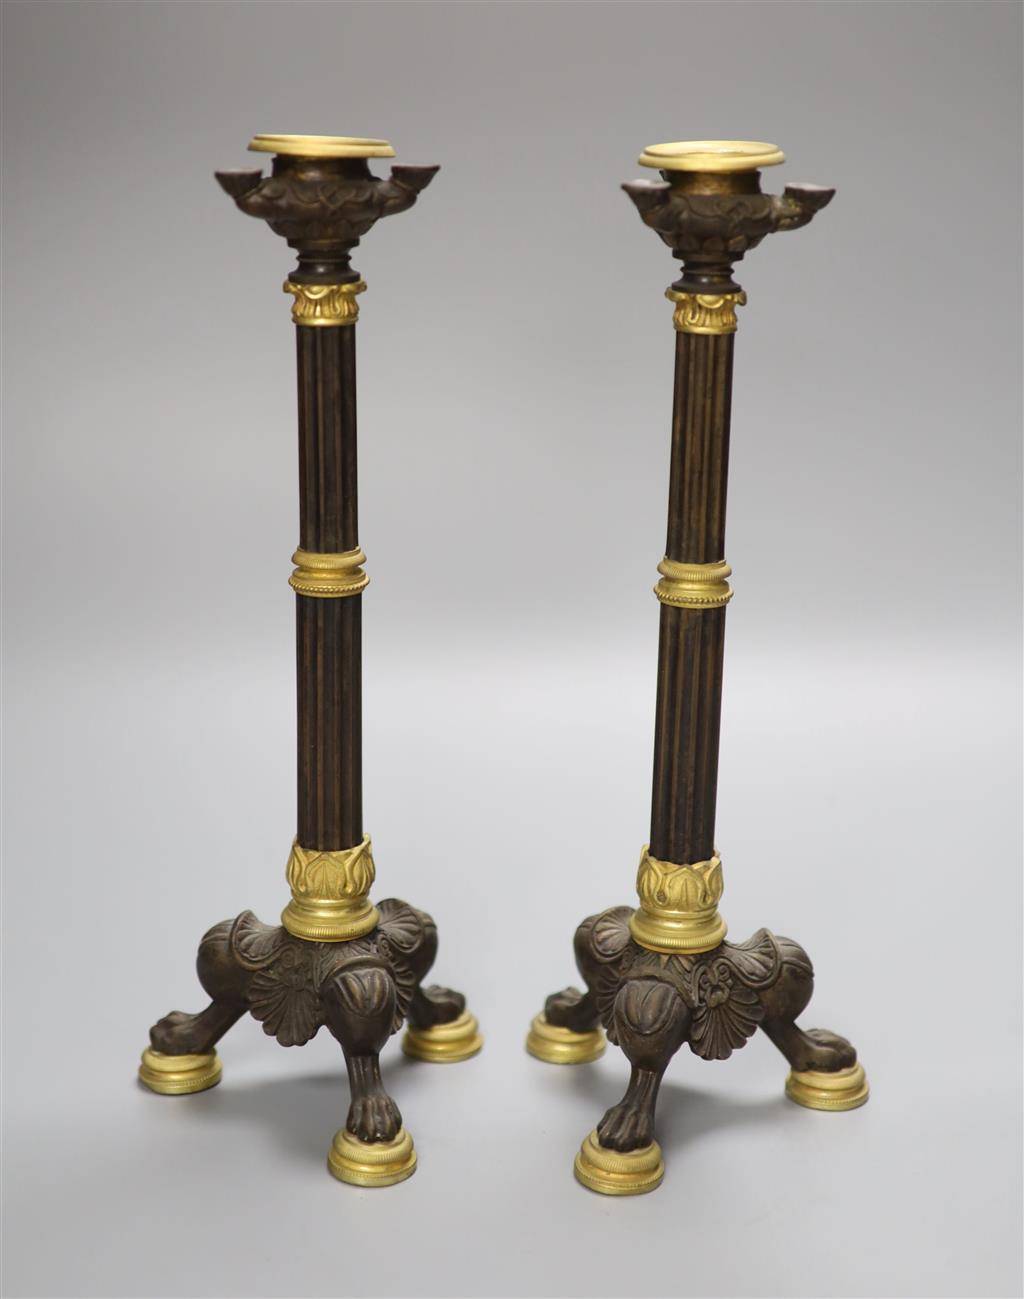 A pair of 19th century French bronze and ormolu mounted candlesticks height 27.9cm (2)